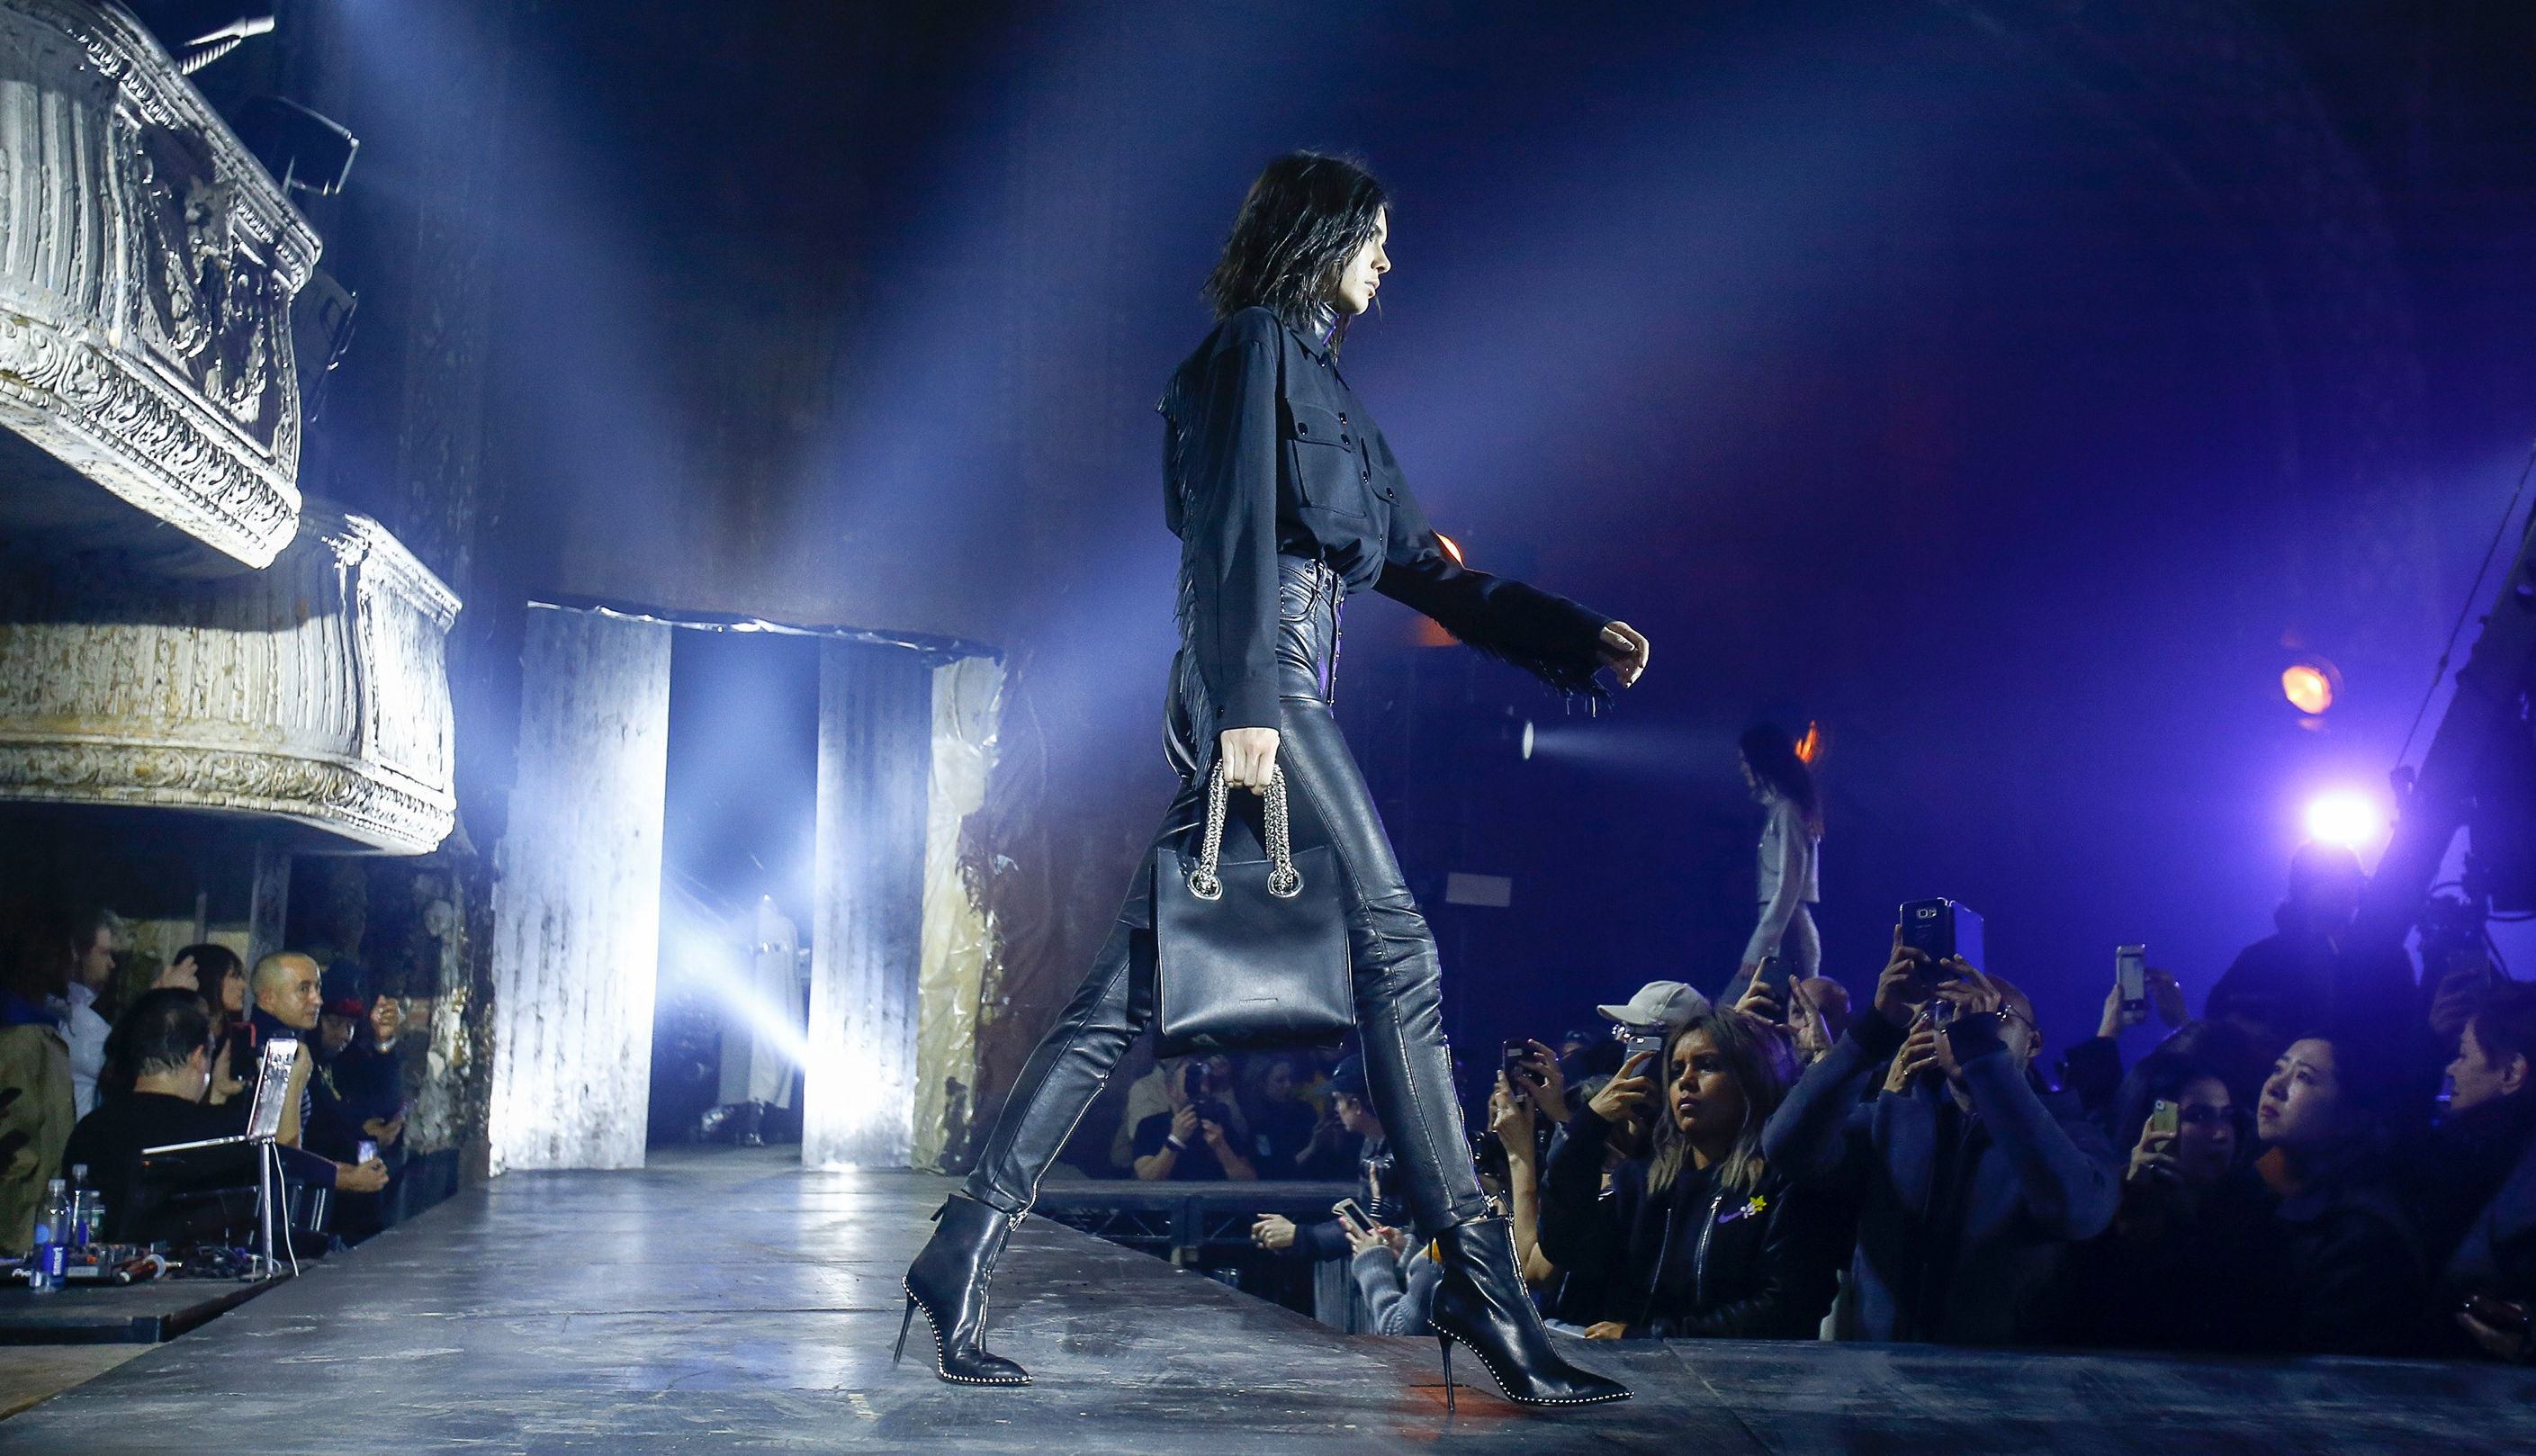 Alexander Wang redefined party-girl chic at New York Fashion Week